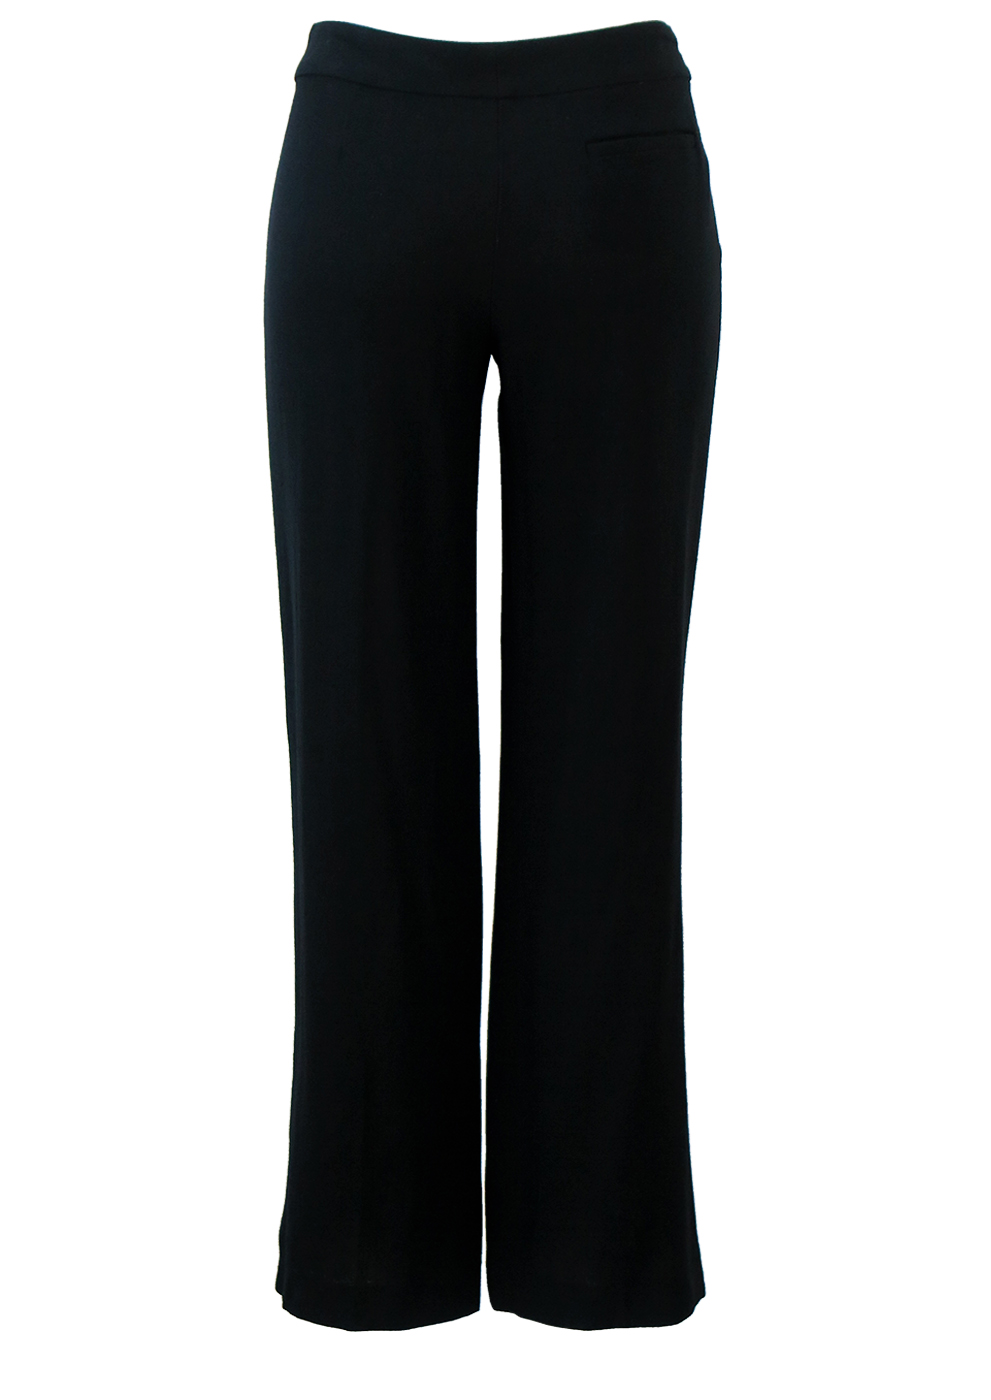 Black Wide Leg Red Valentino Trousers with Bow Detail - M | Reign Vintage